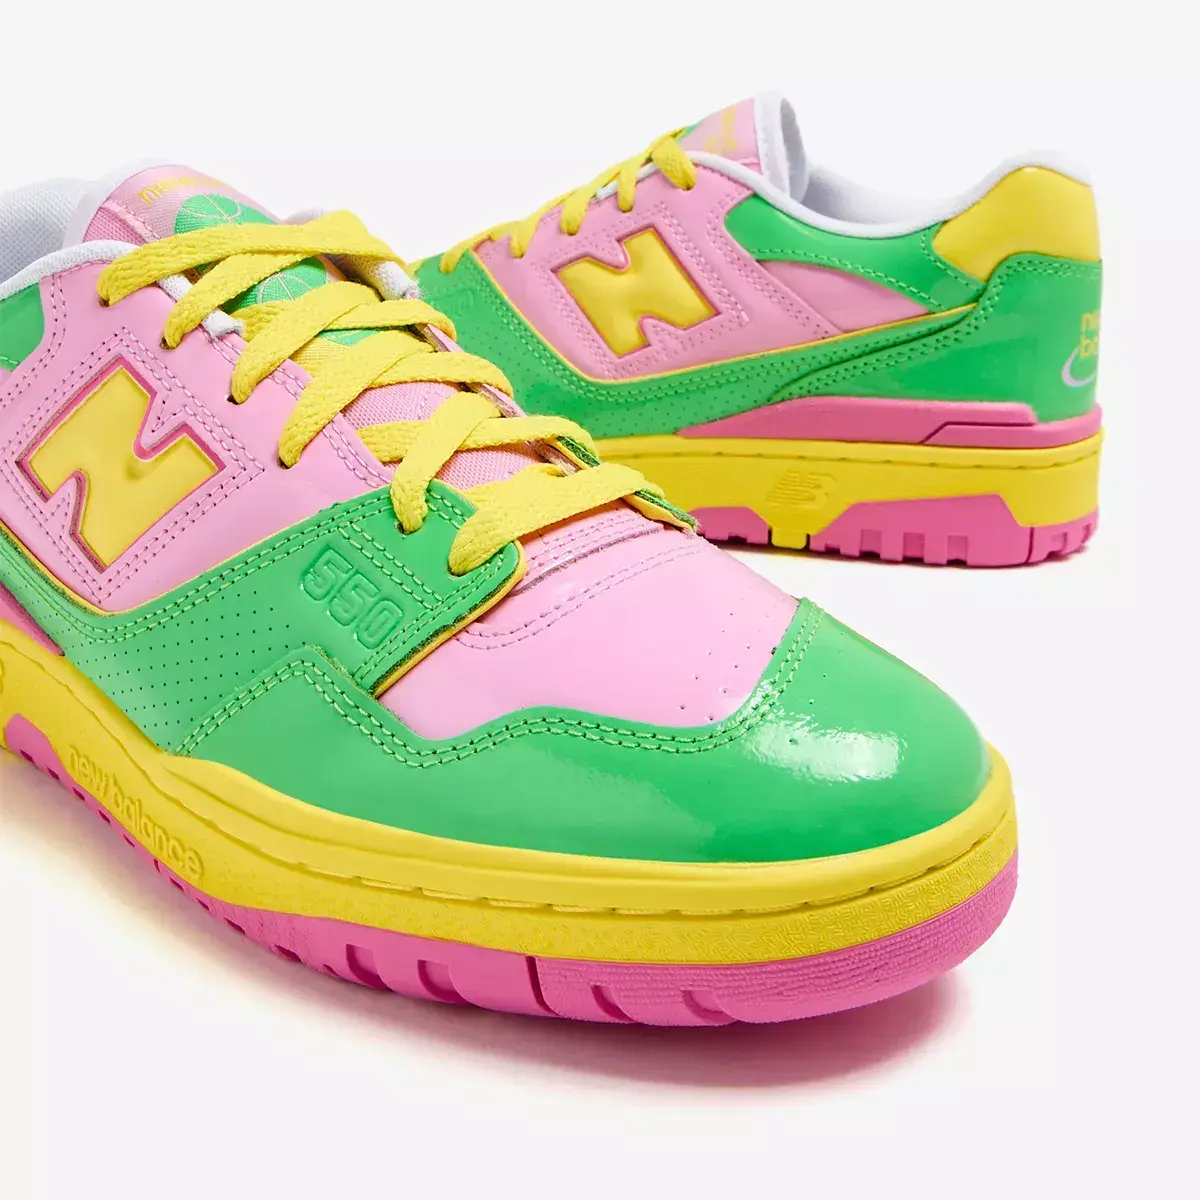 New Balance 550 Y2K Patent Leather details